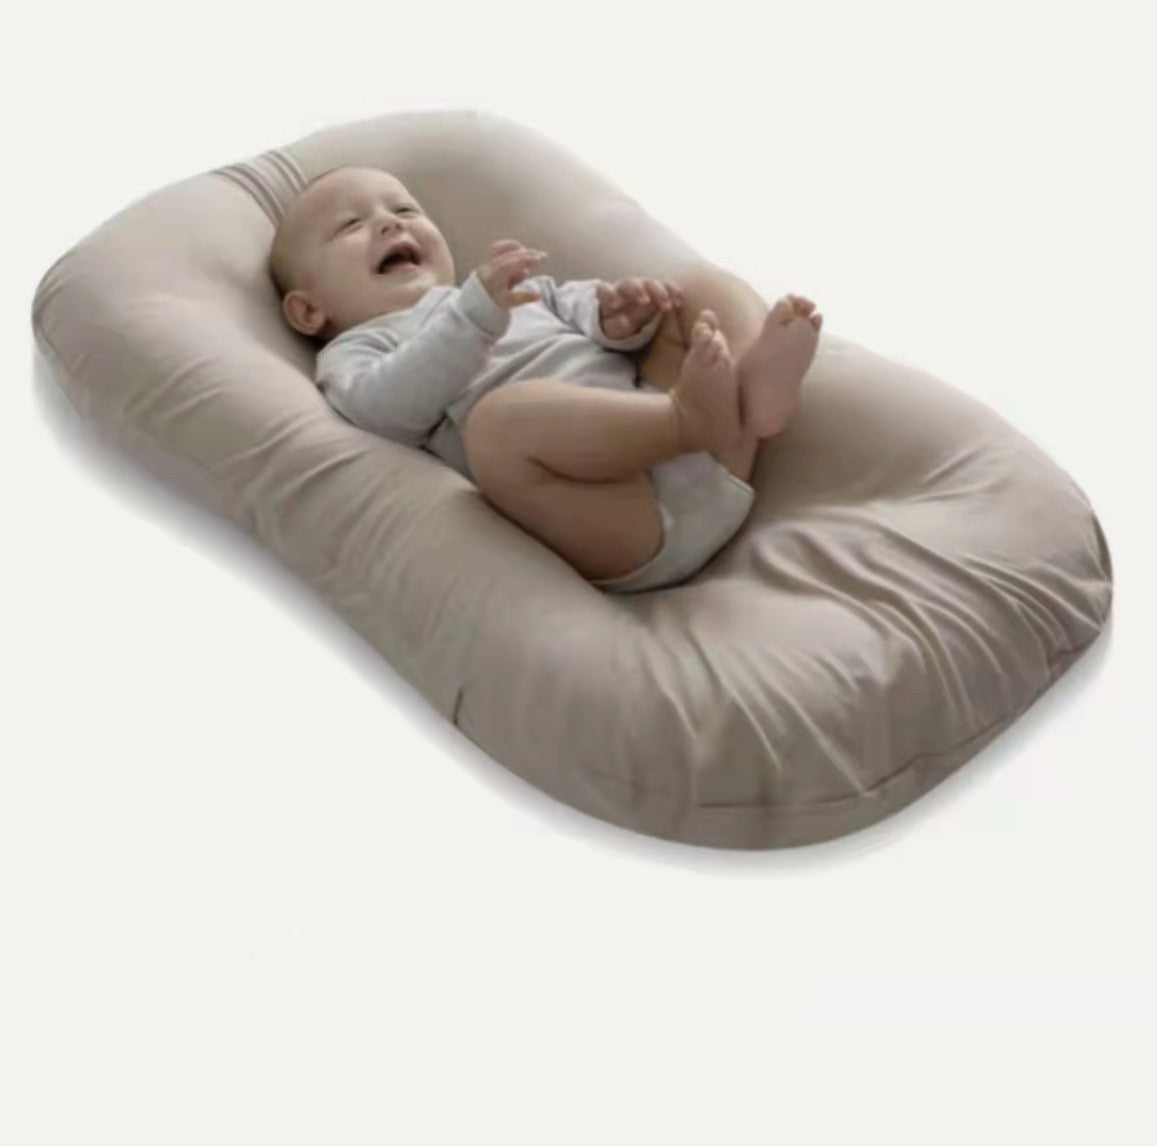 Newborn Baby Comfort Portable Movable Bionic Bed - TryKid